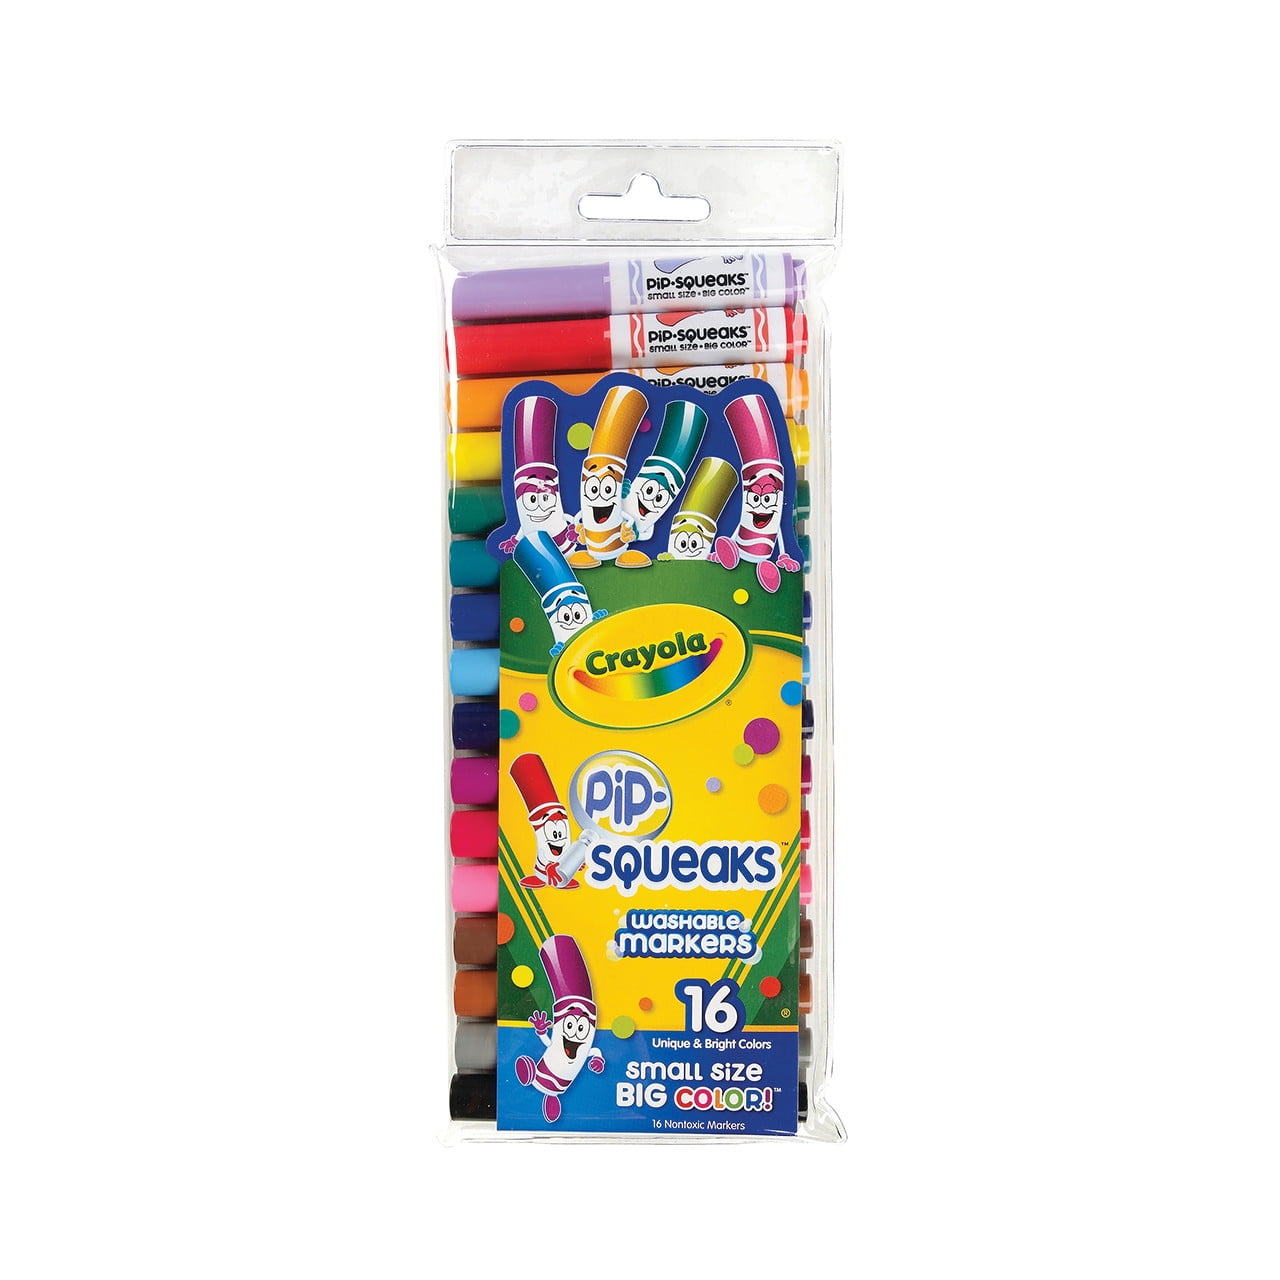 Crayola Pip Squeaks Washable Markers, Marker Set for Kids, Gifts, Ages 4,  5, 6, 7 and Ultimate Crayon Box Collection (152ct), Bulk Kids Crayon Caddy